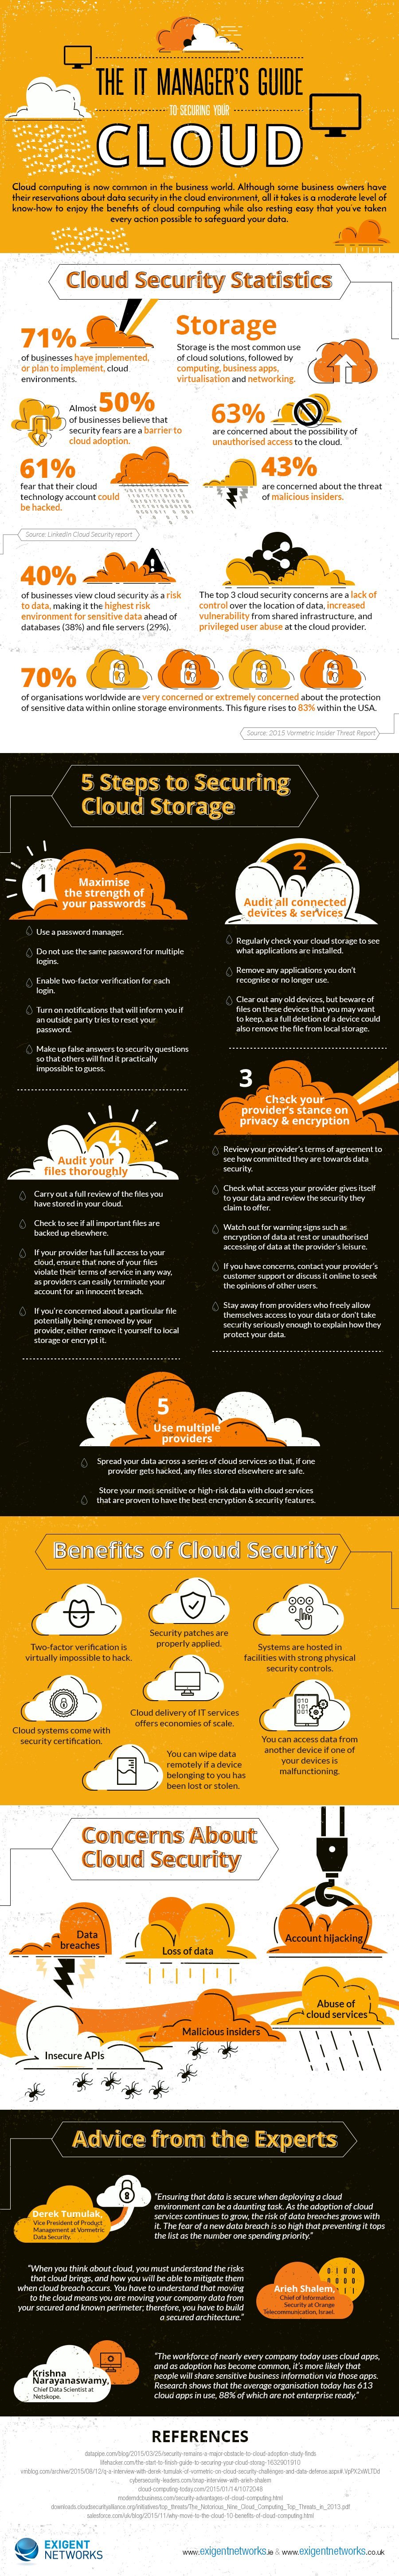 The IT managers guide to securing your cloud - infographic